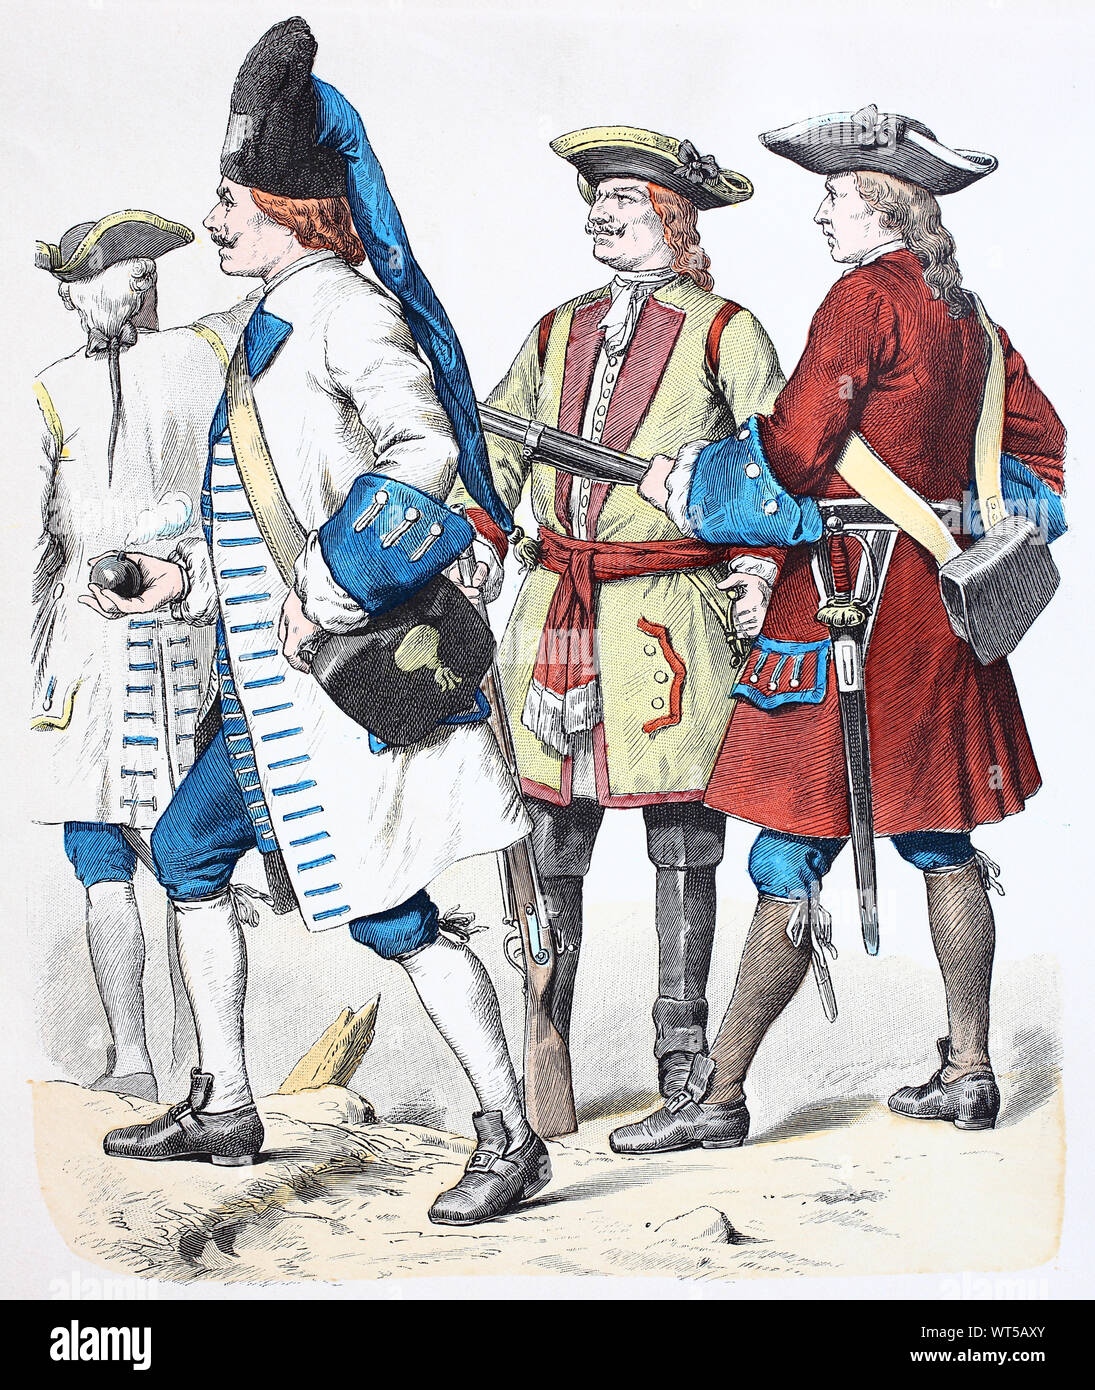 National costume, clothes, history of the costumes, officer of the grenadiers, grenadier, Dragoon, infantry, archiepiscopal Konstanzer the military, military uniform from Germany, in 1738, Volkstracht, Kleidung, Geschichte der Kostüme, Offizier der Grenadiere, Grenadier, Dragoner, Infanterie, Erzbischöfliches Konstanzer Militär, Militäruniform aus Deutschland, 1738 Stock Photo